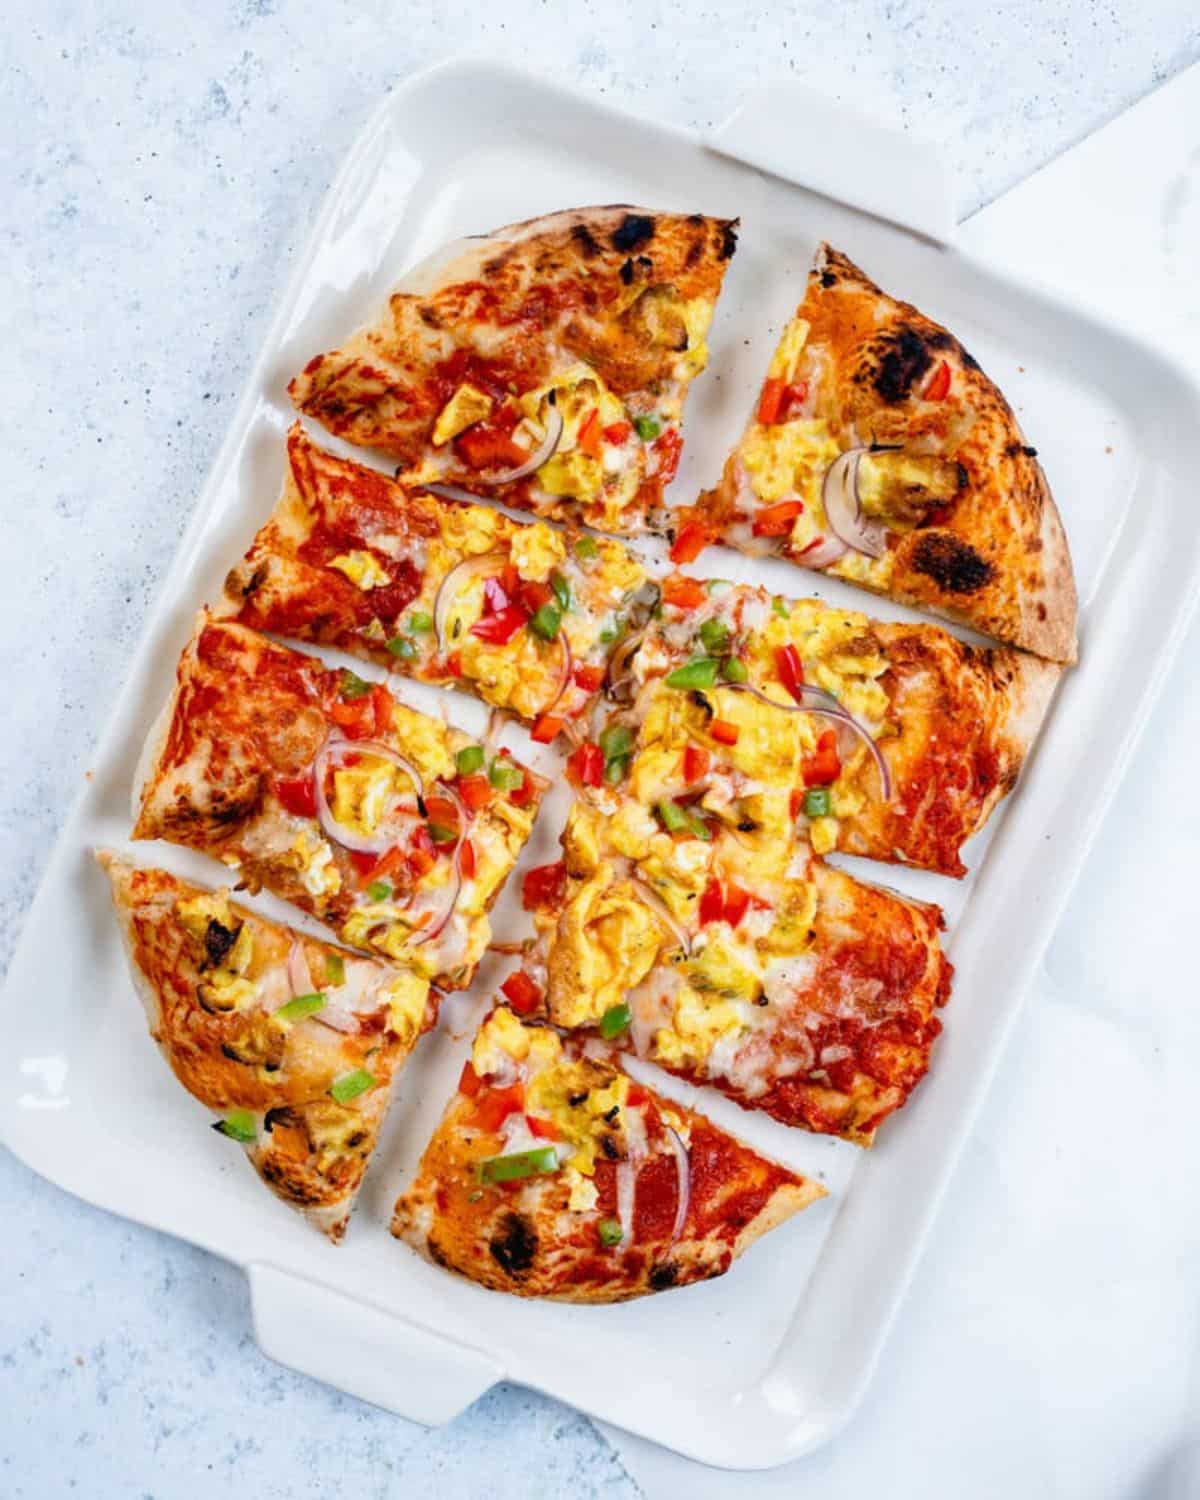 Sliced breakfast pizza on a white tray.